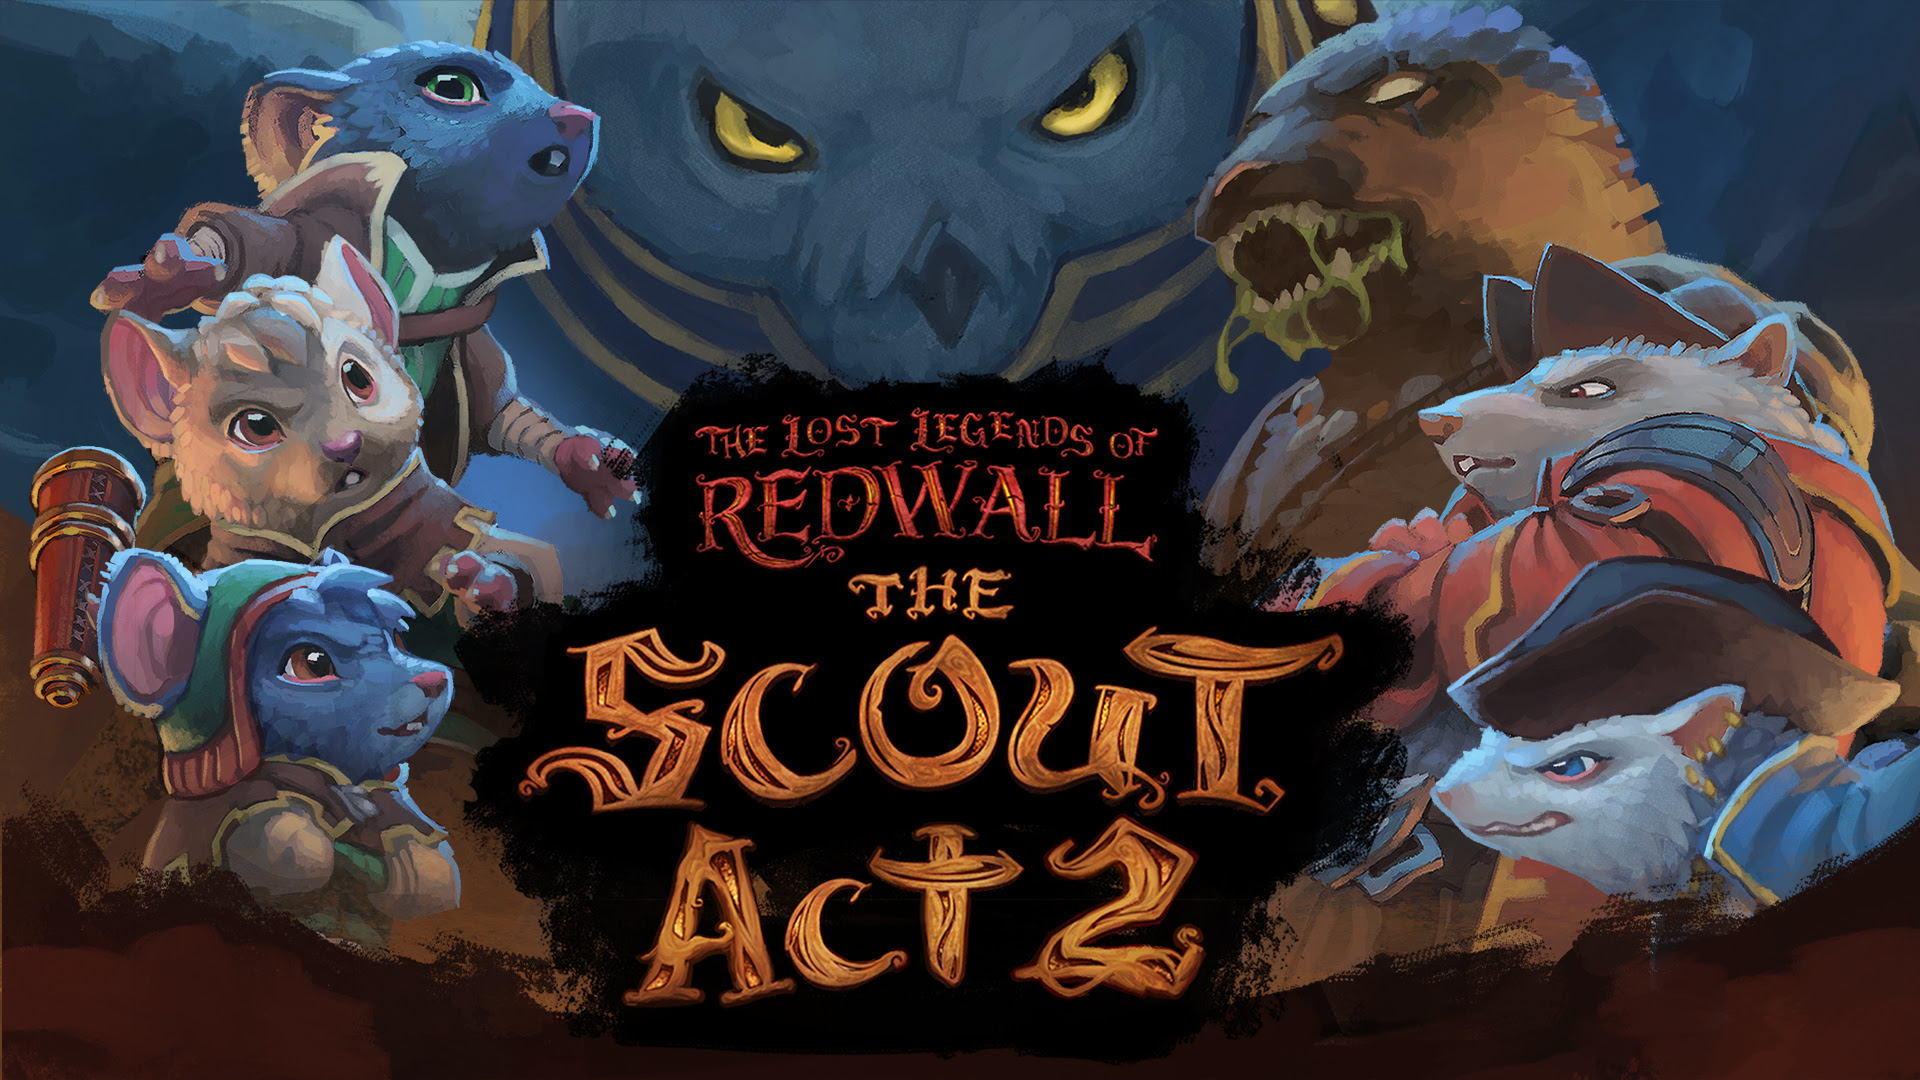 The lost legends of redwall. The Lost Legends of Redwall: the Scout Act 1. The Lost Legends of Redwall обложка. Redwall Scout книга.